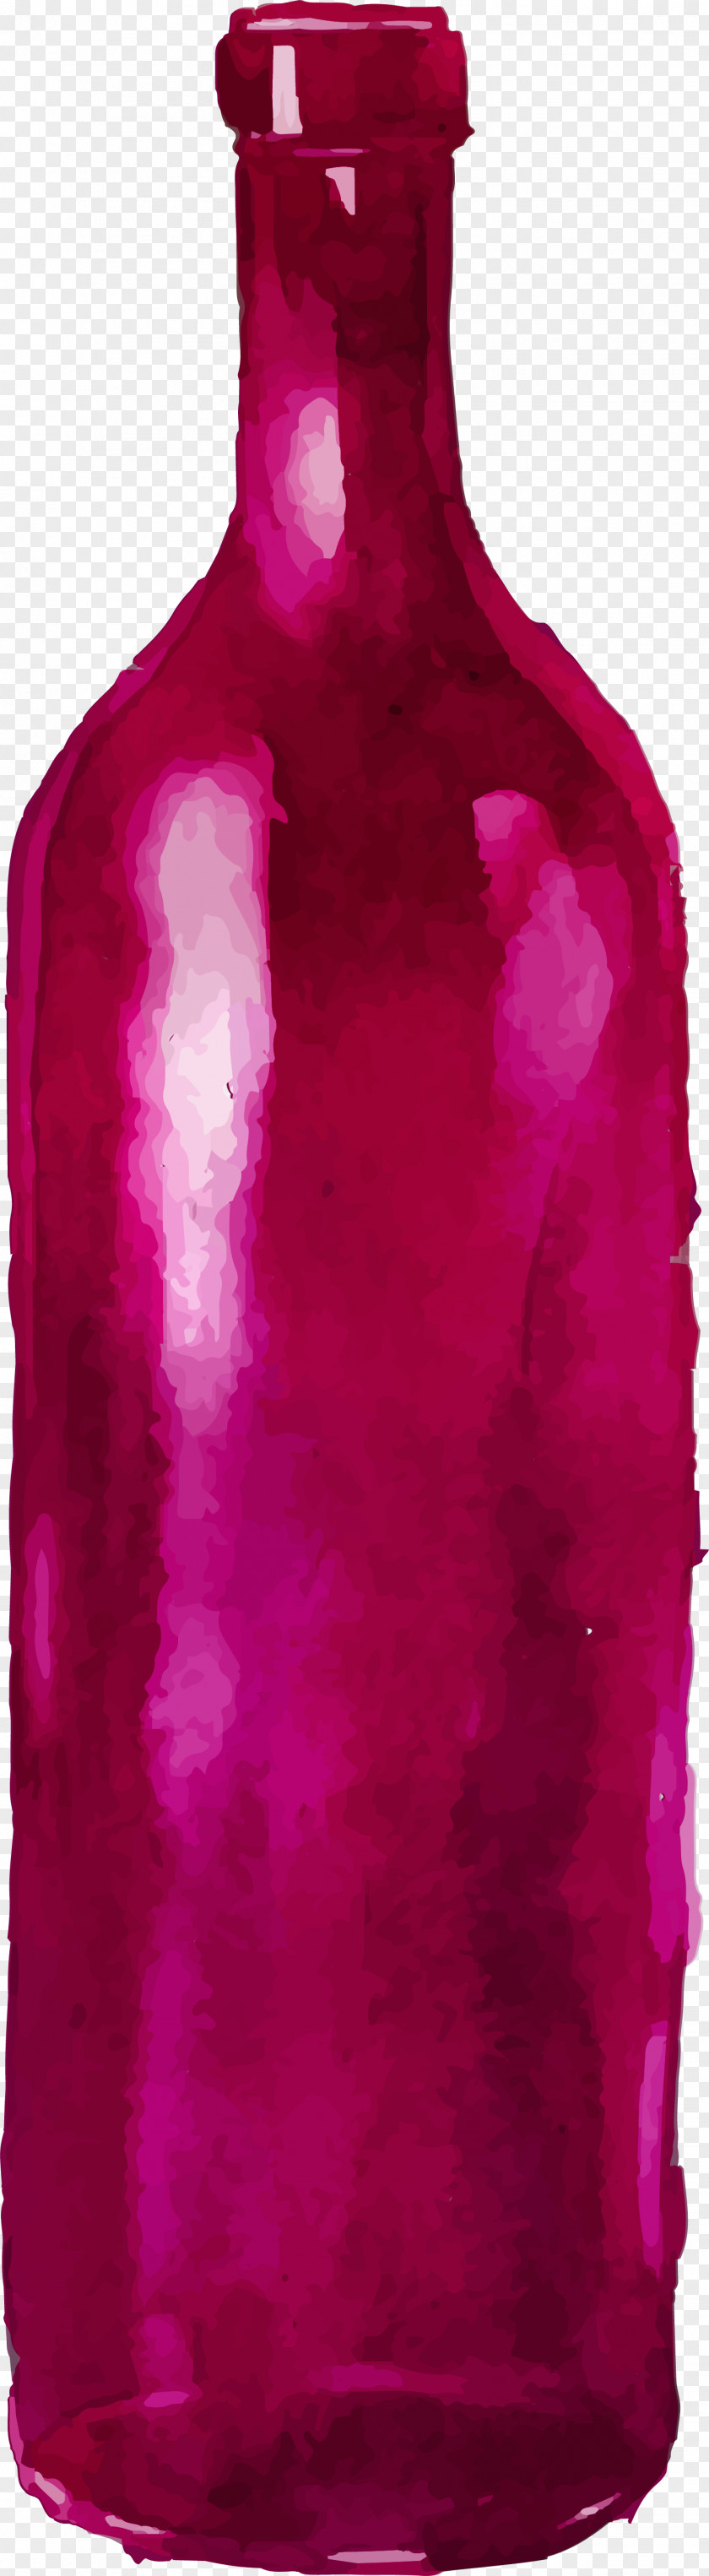 Hand Painted Red Wine Bottle Watercolor Painting PNG